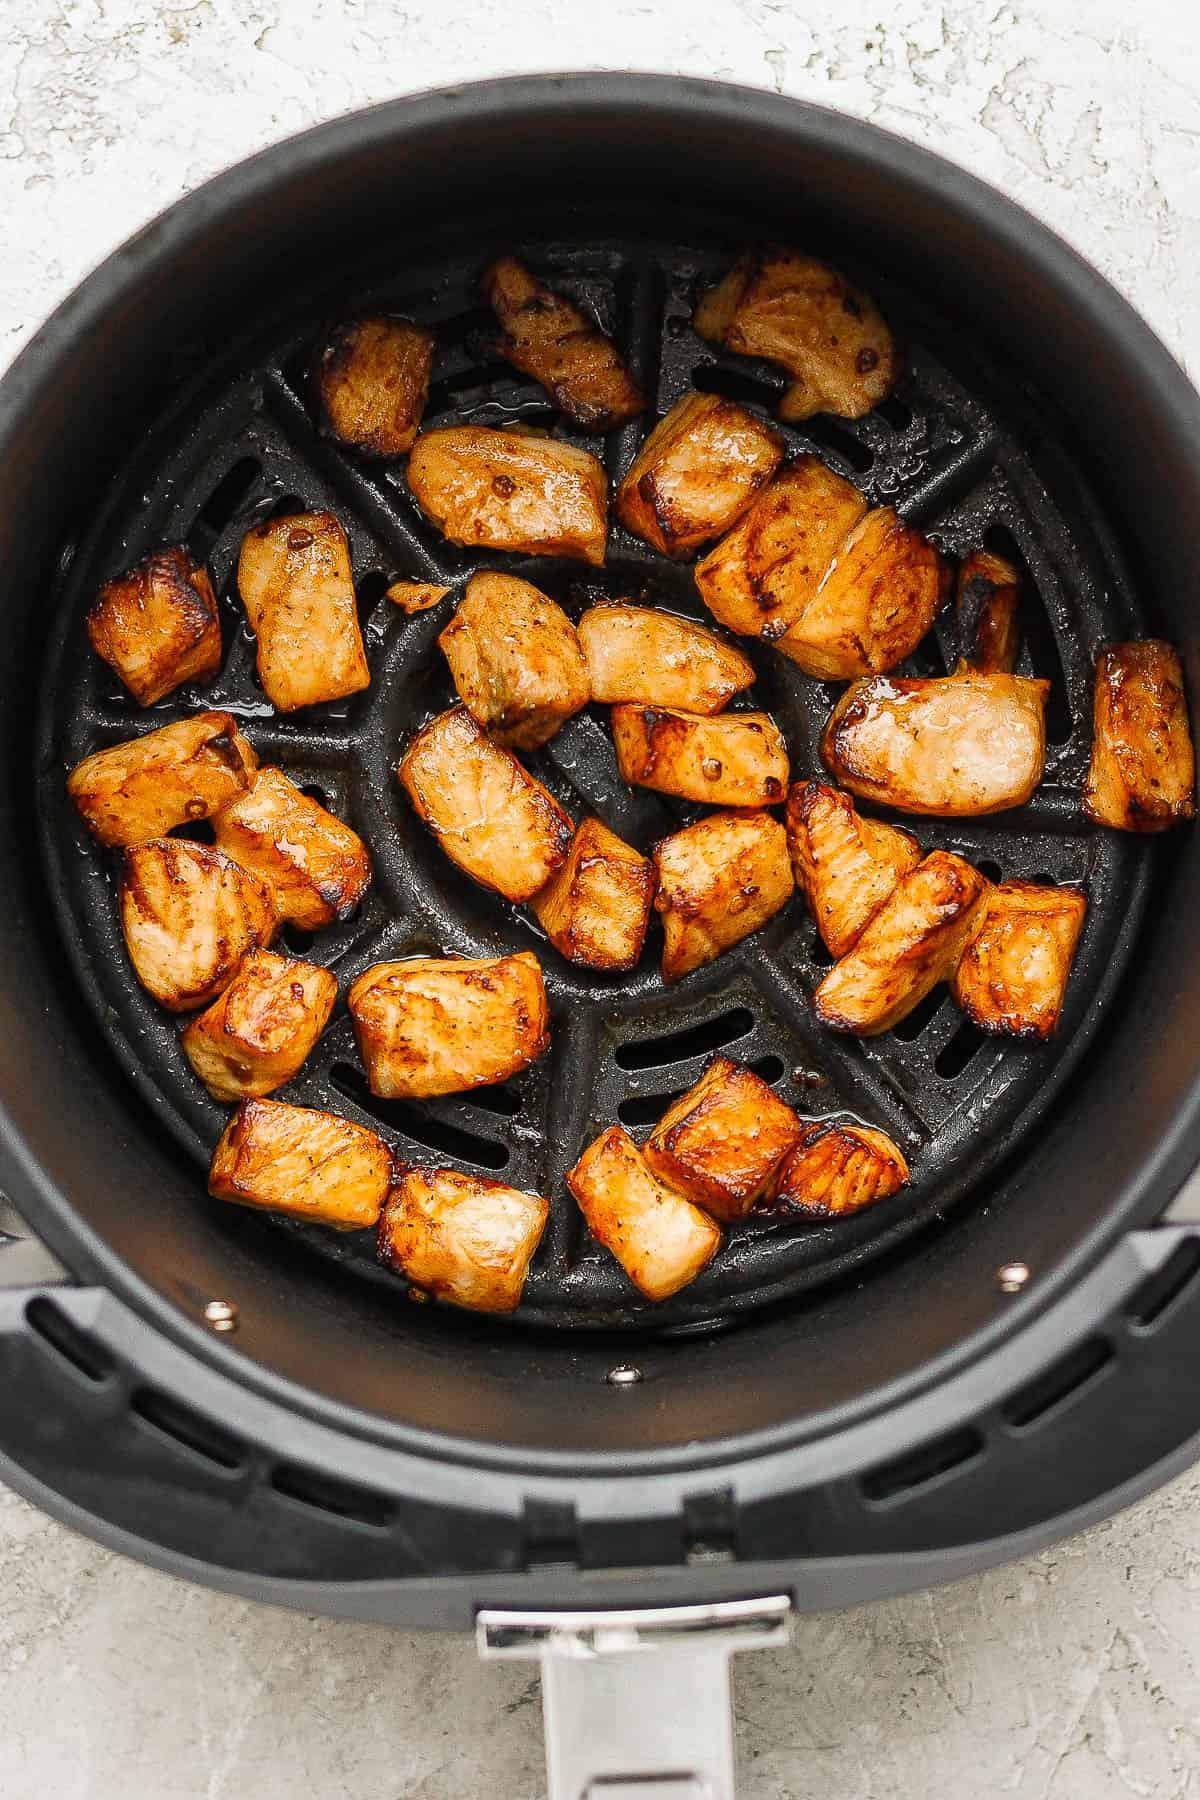 Cooked air fryer salmon bites in the basked of an air fryer before being served.